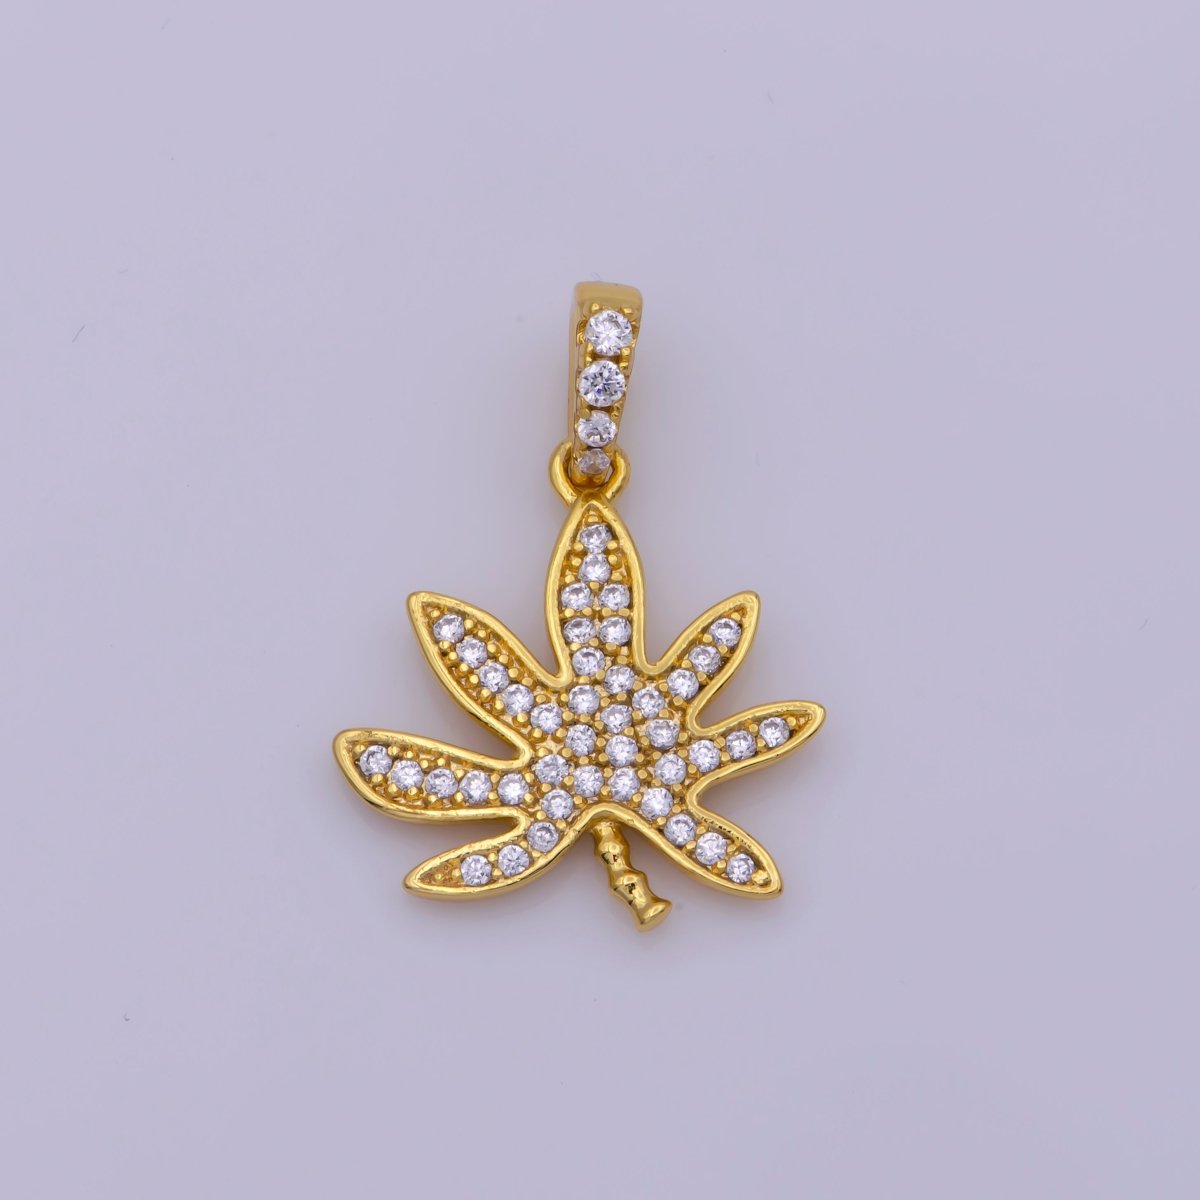 24K Gold Filled Mary Jane Pendant Micro Pave Leaf 420 Charm Jewelry Supply N-1448 - DLUXCA